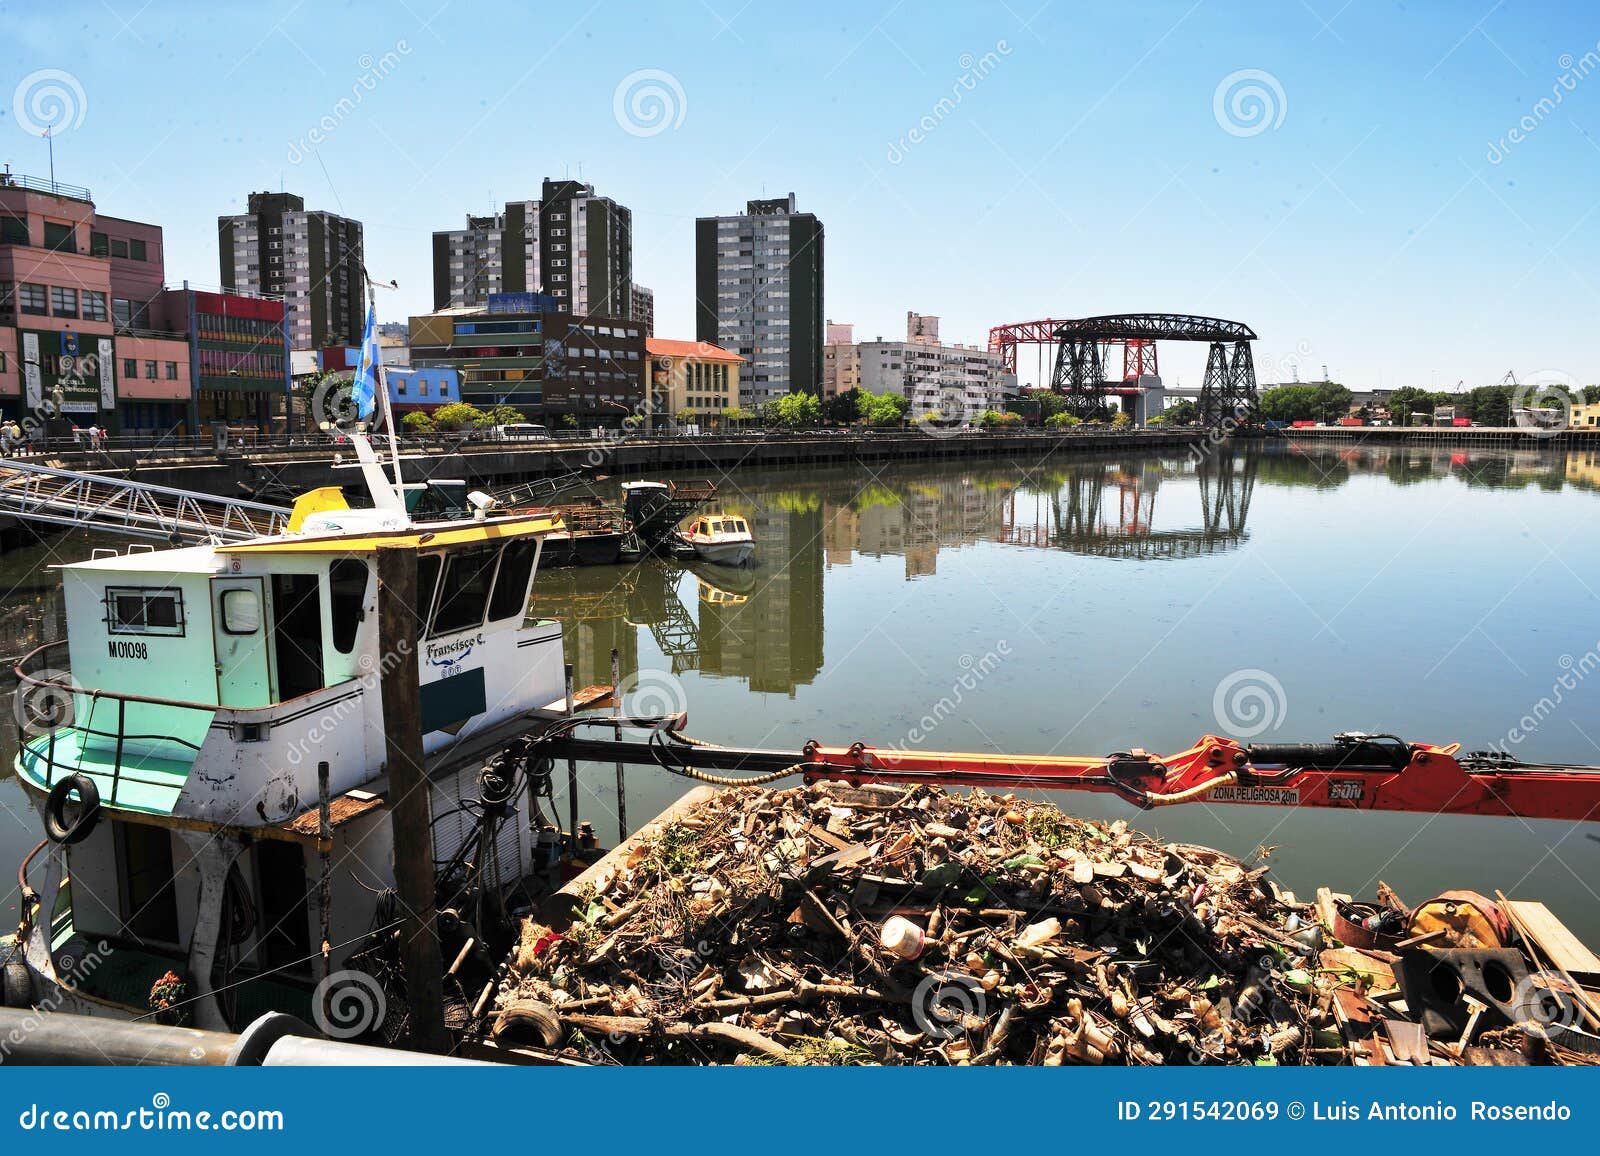 contaminated river full of garbage, riachuelo river. old boat and dirty water arround